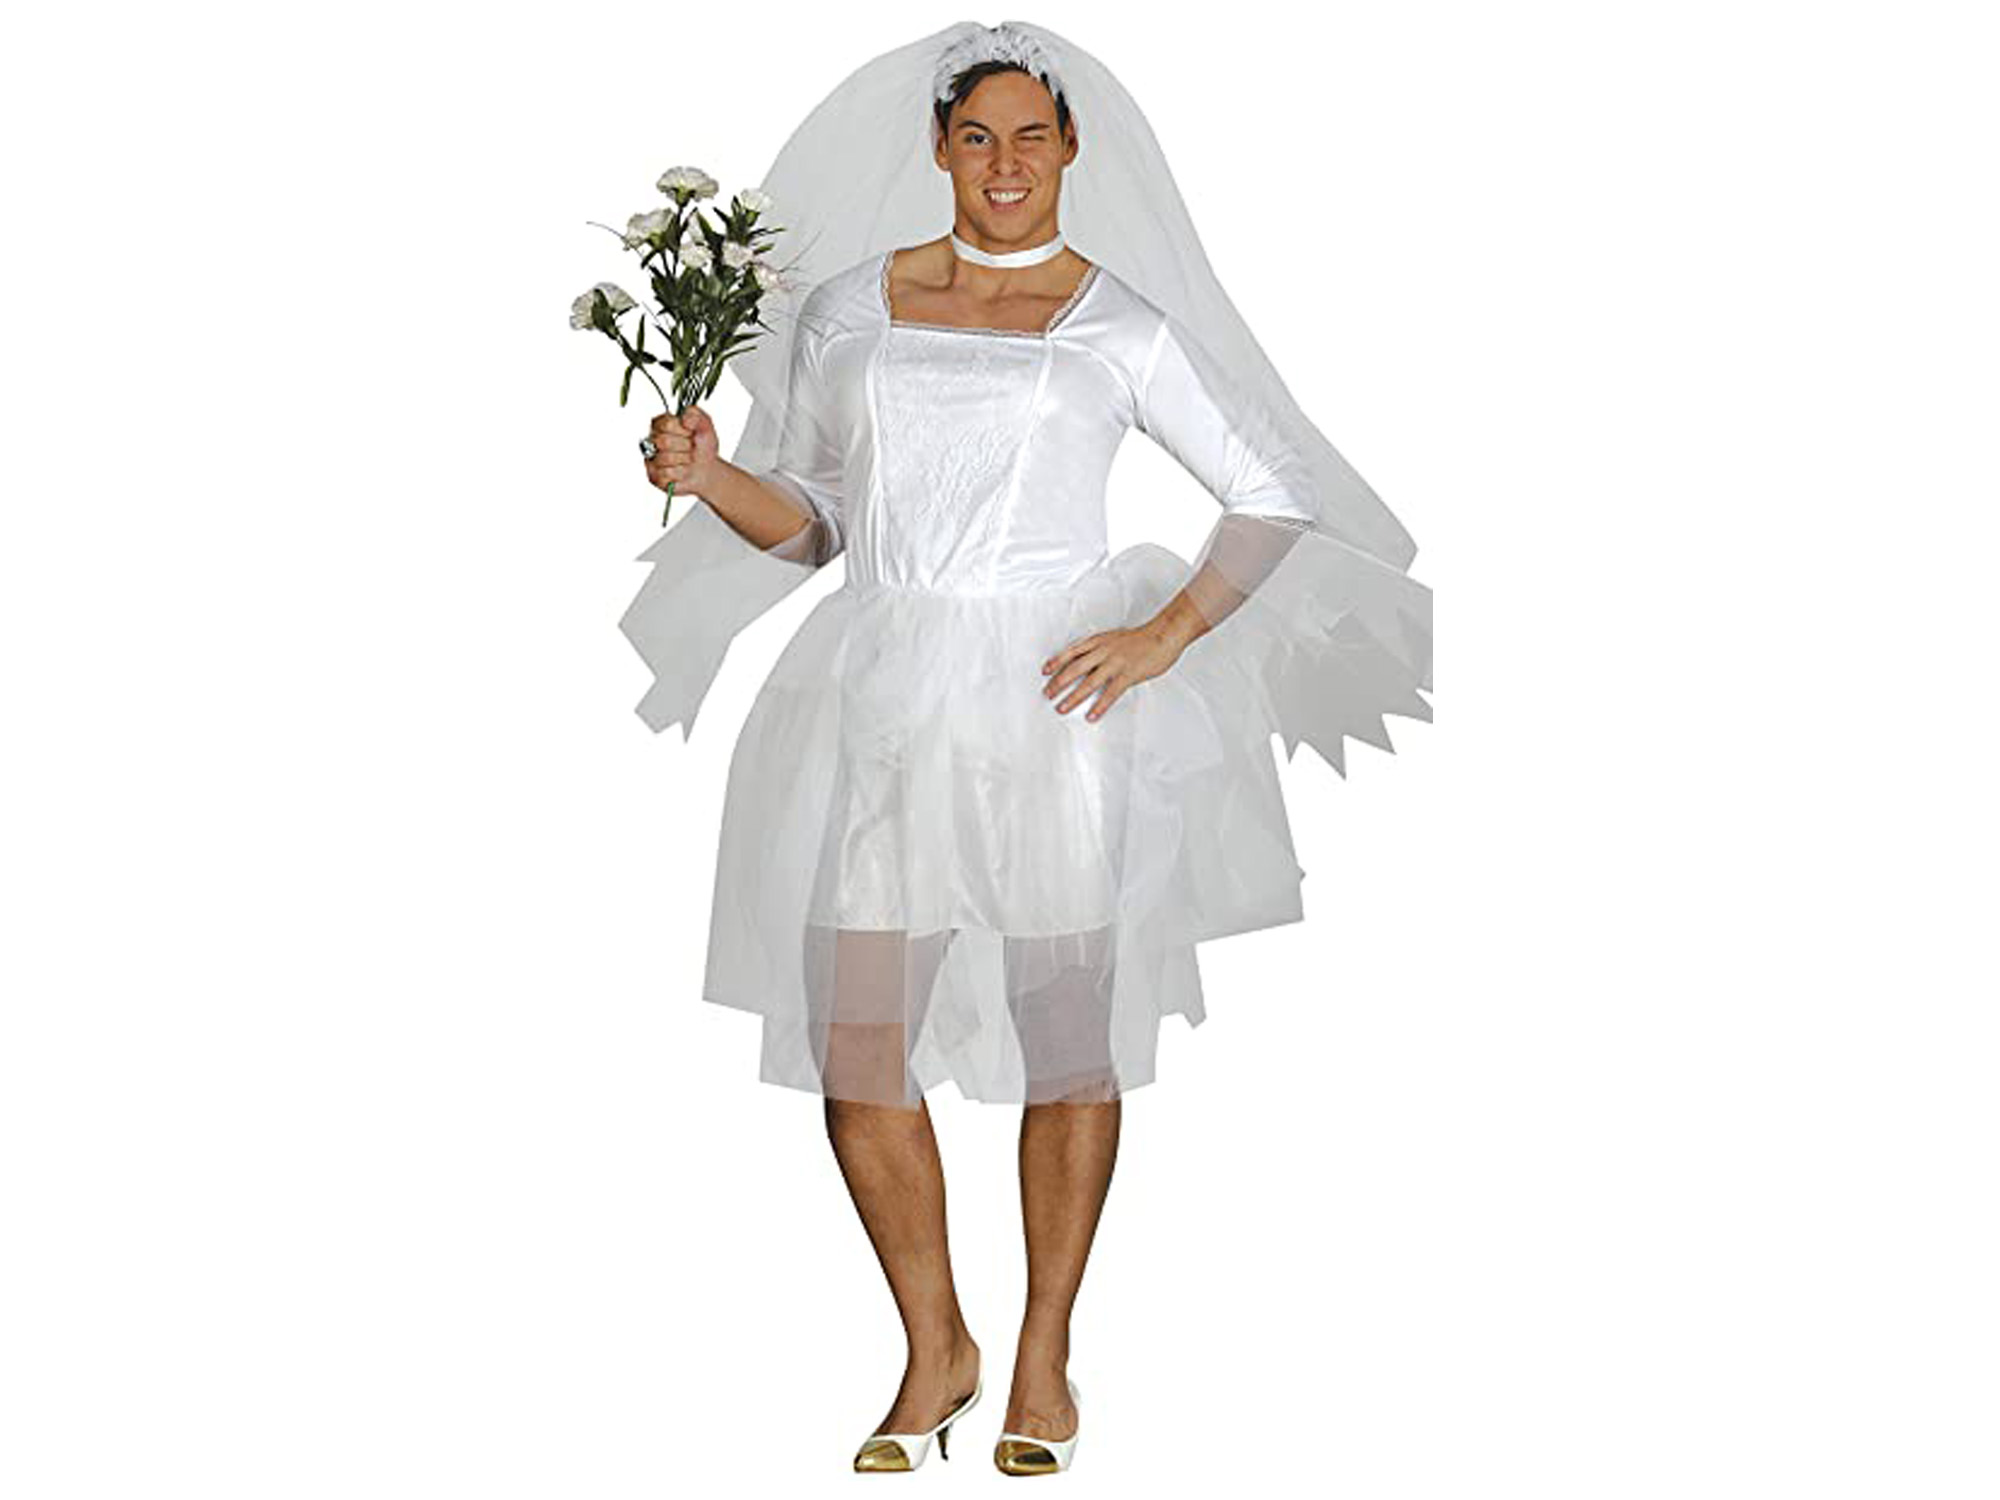 Bride-to-Be Outfit - Amazon